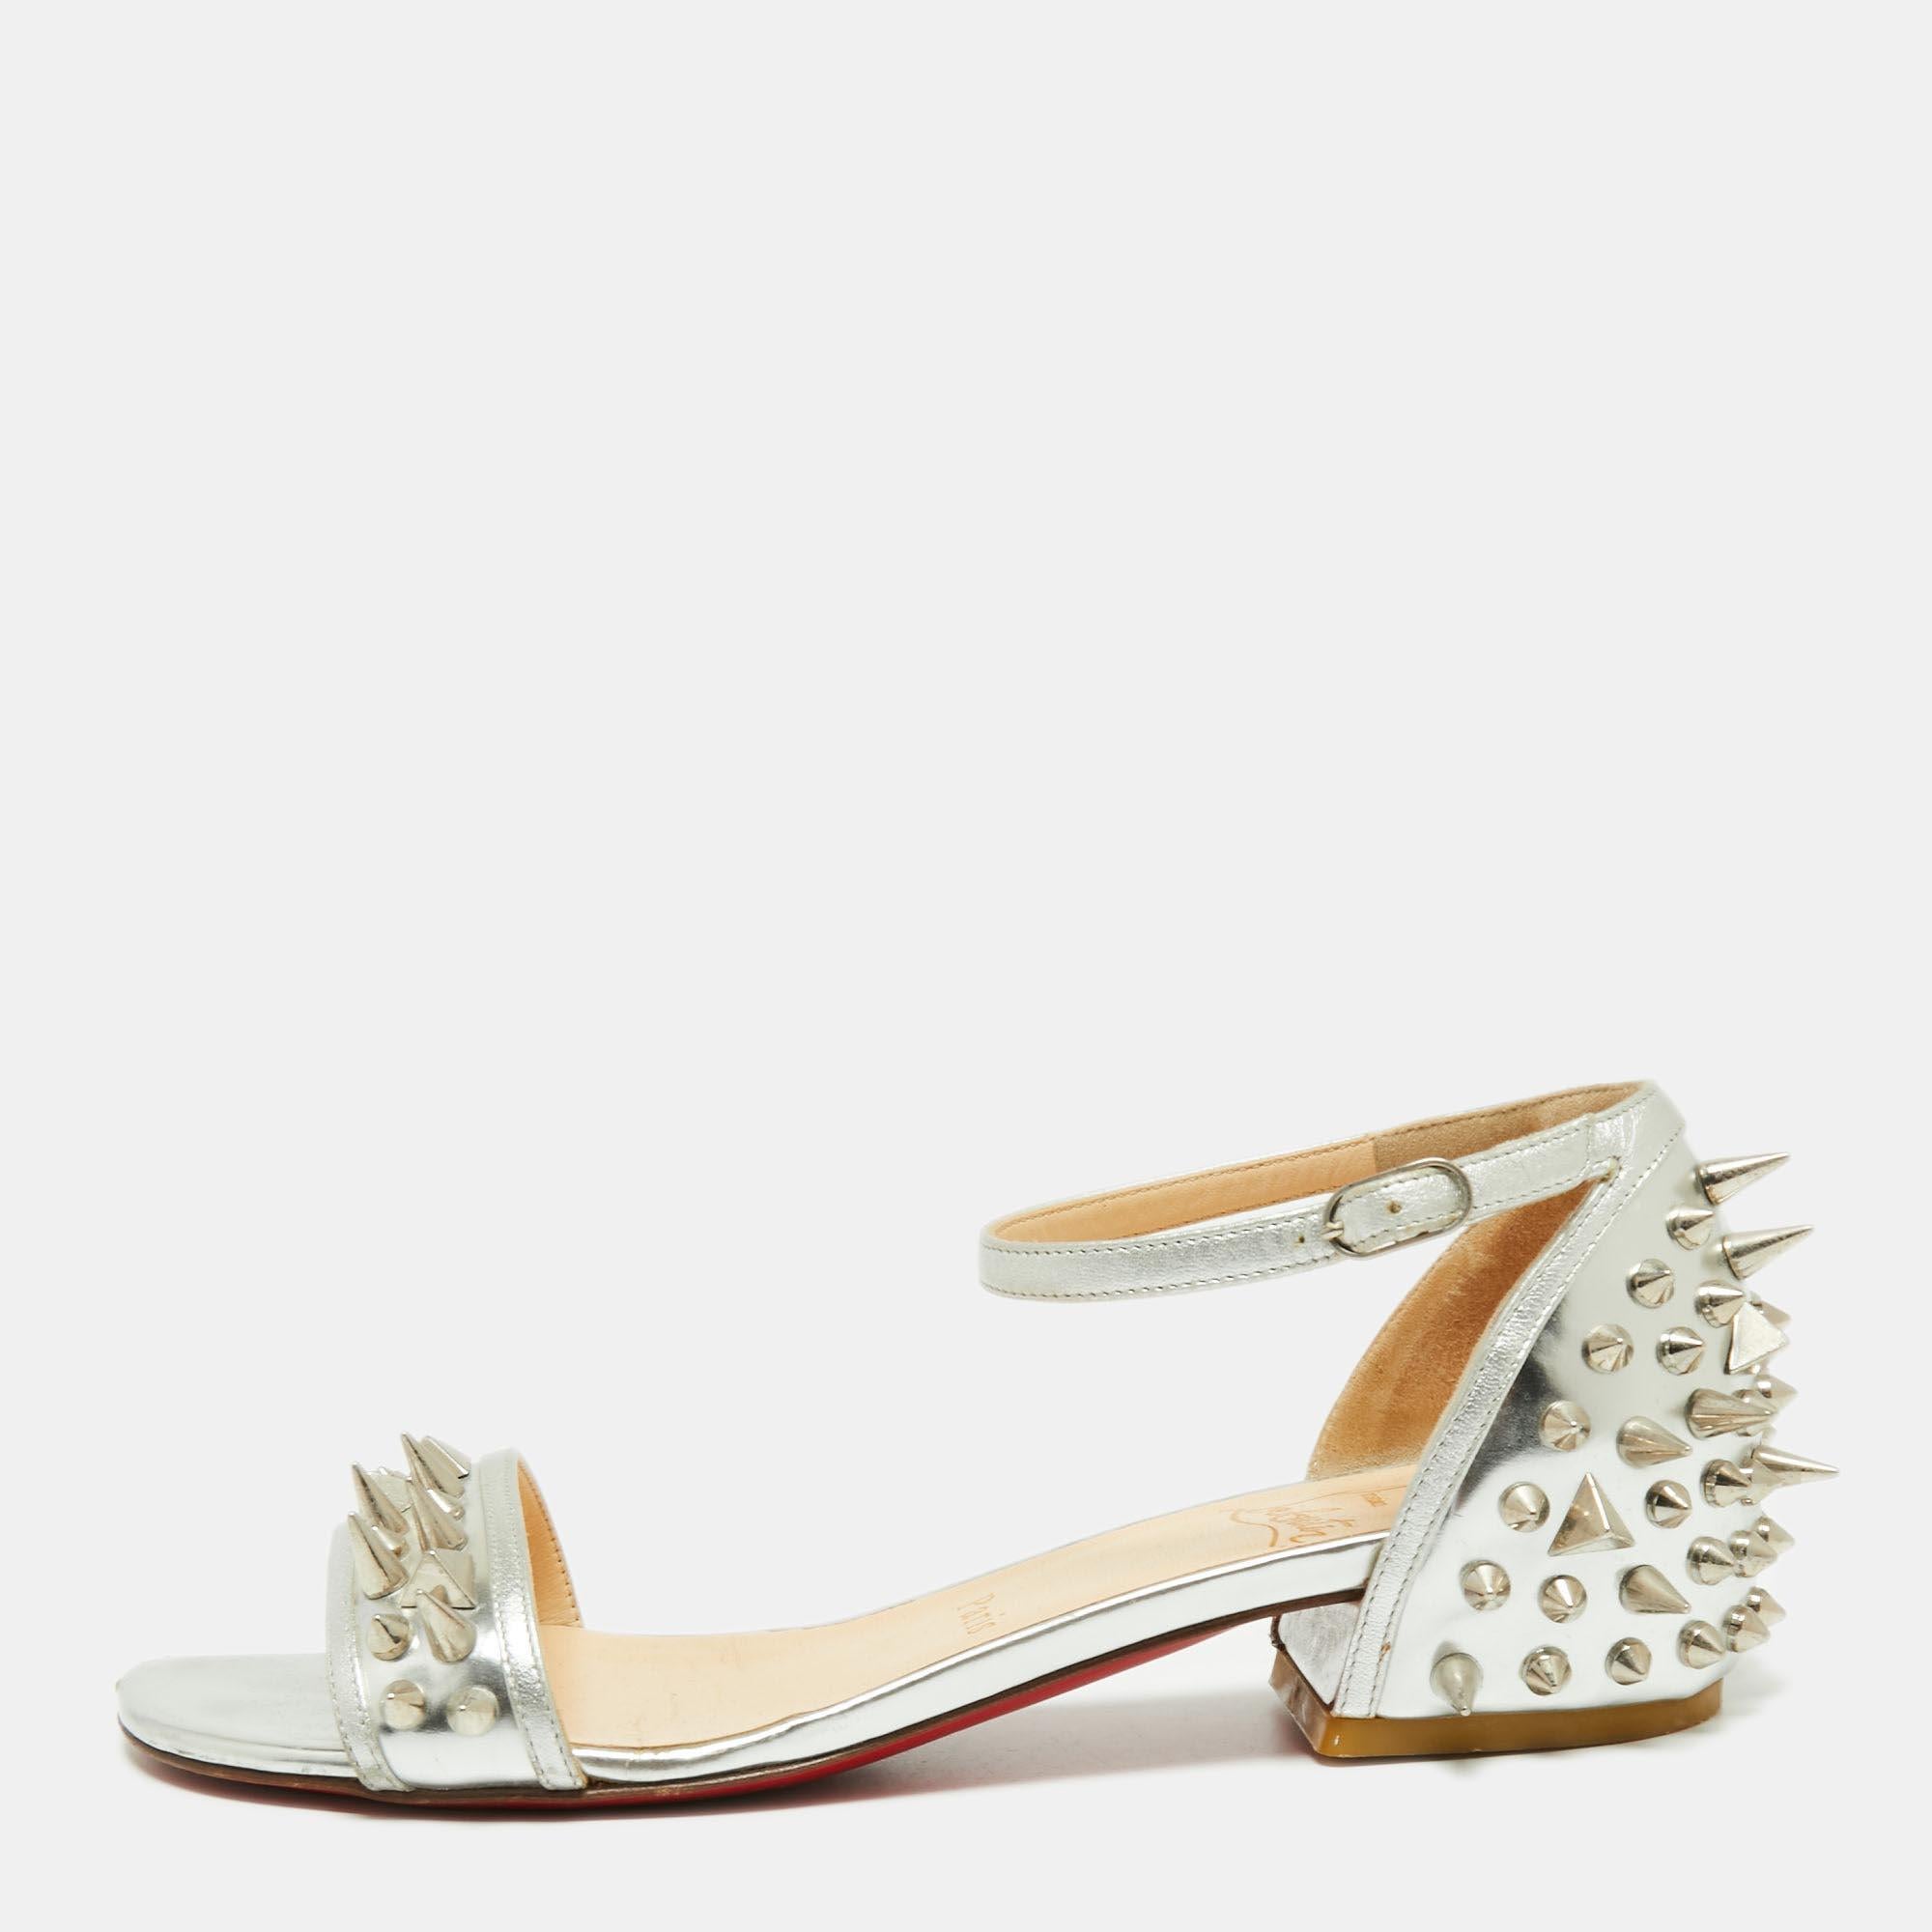 Christian Louboutin Silver Leather Studded Druide Ankle-Strap Sandals Size 35.5 For Sale